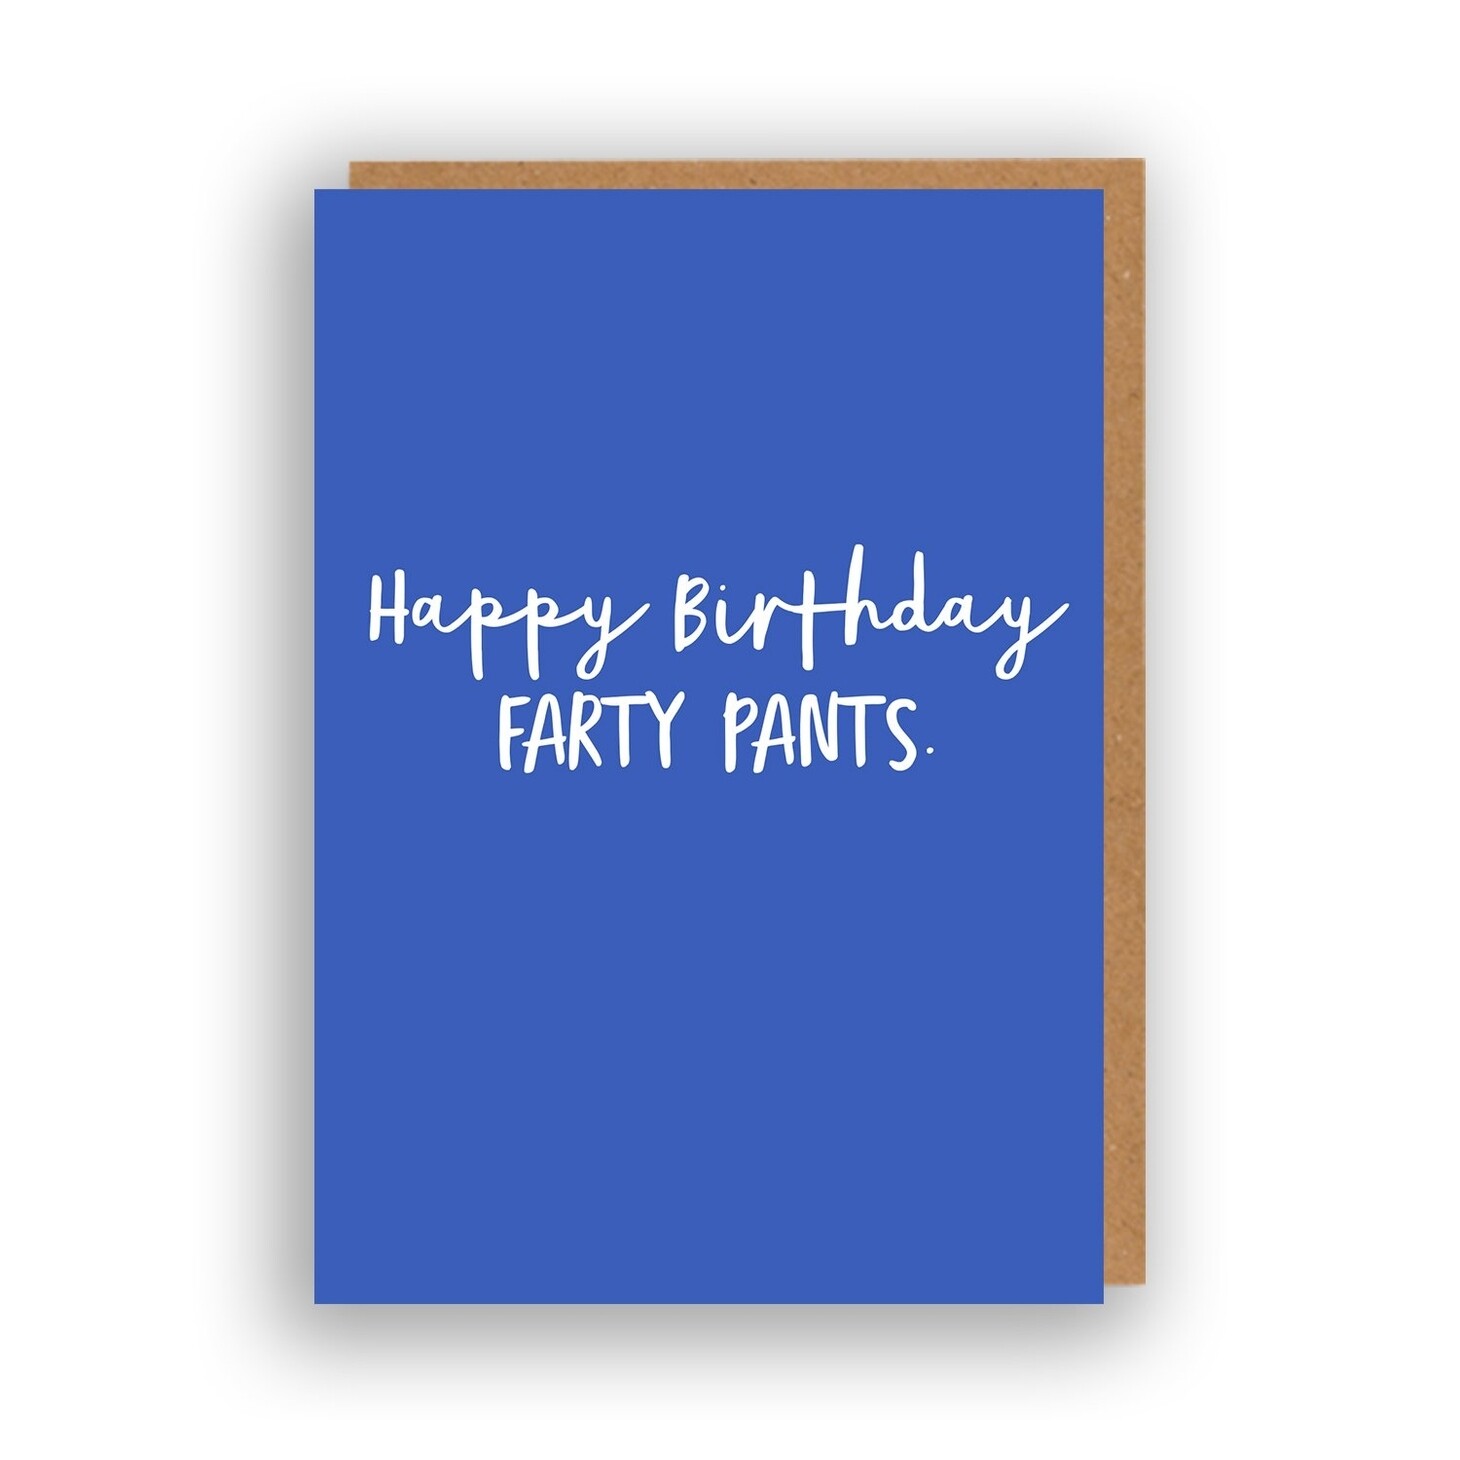 Happy Birthday Farty Pants Card